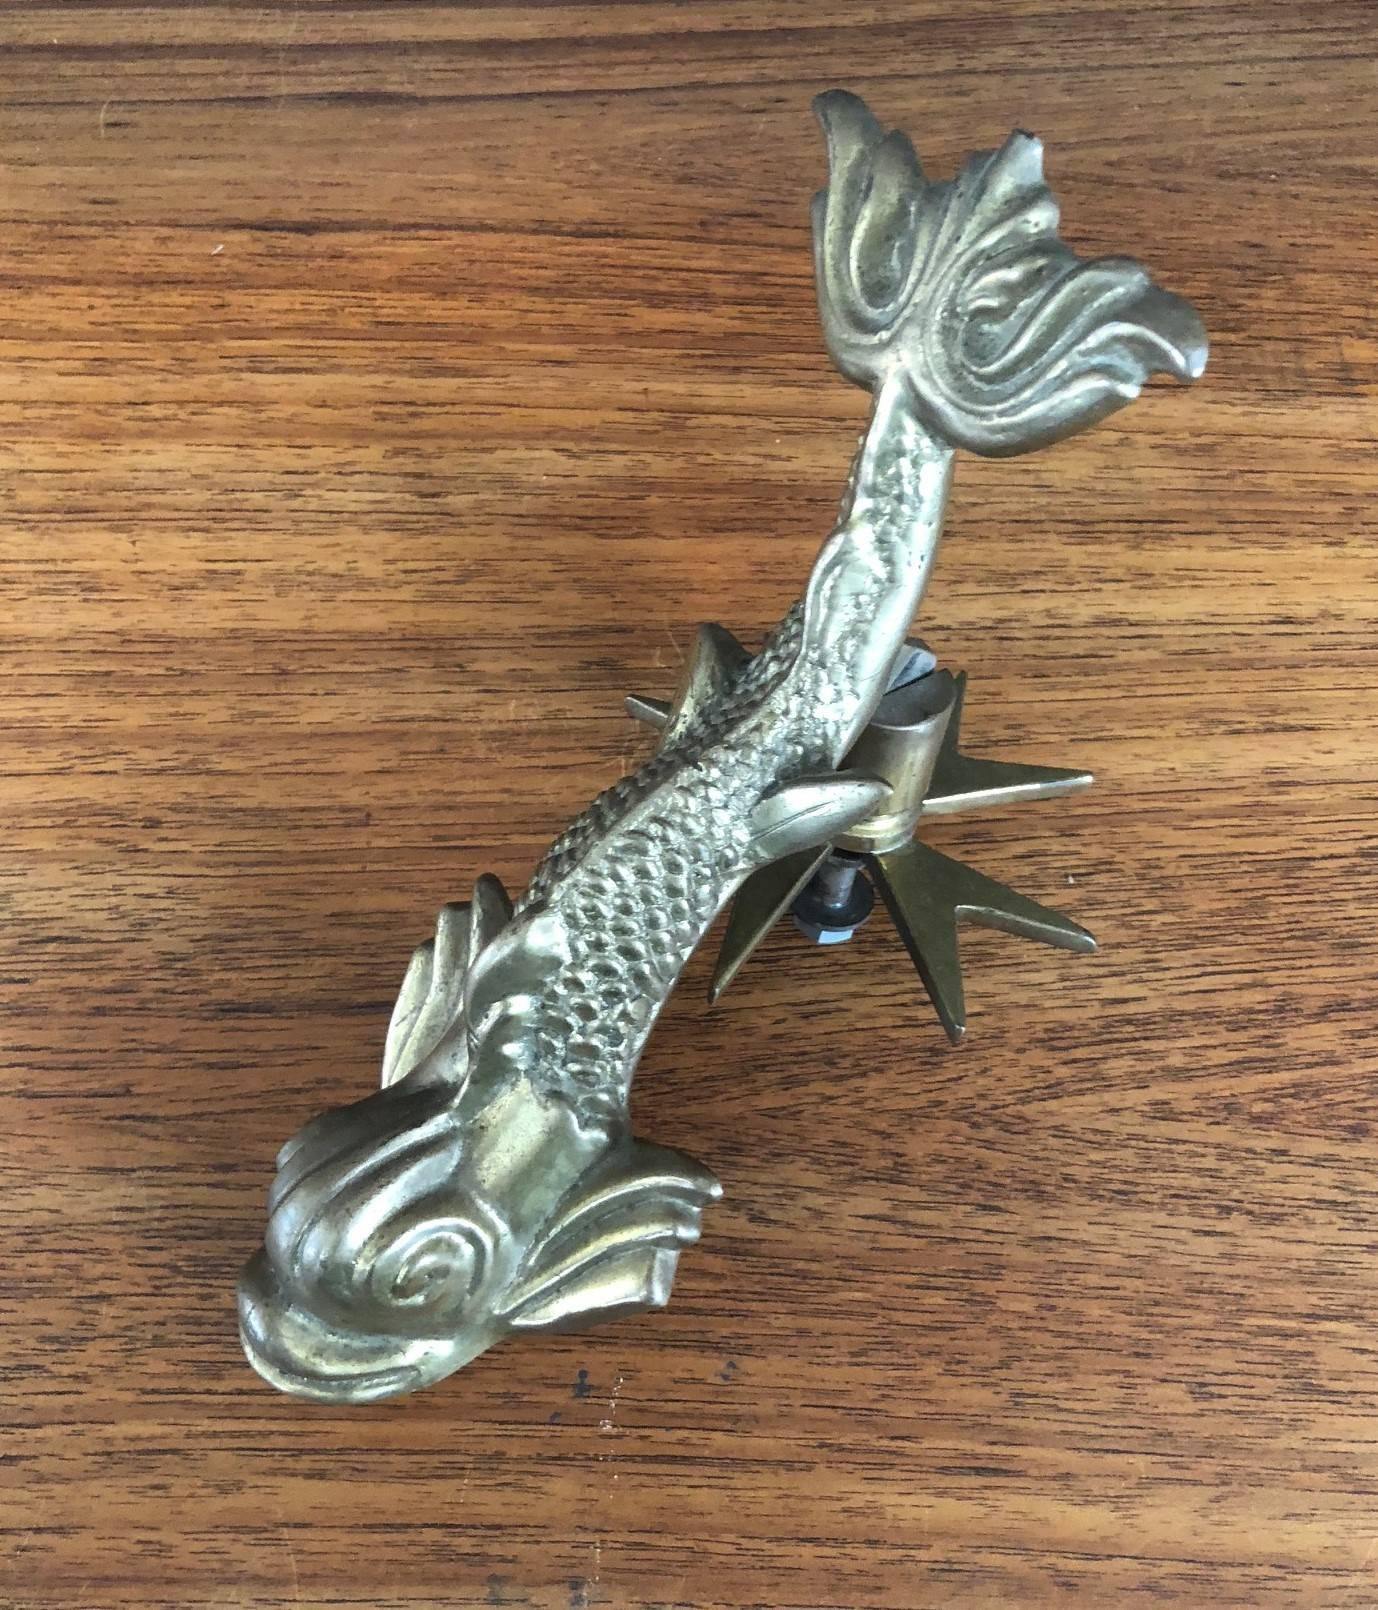 Vintage Maltese cross and koi fish figural brass door knocker by Cutajar Works of Malta, circa 1950s. The knocker is quite large measuring: 9.5